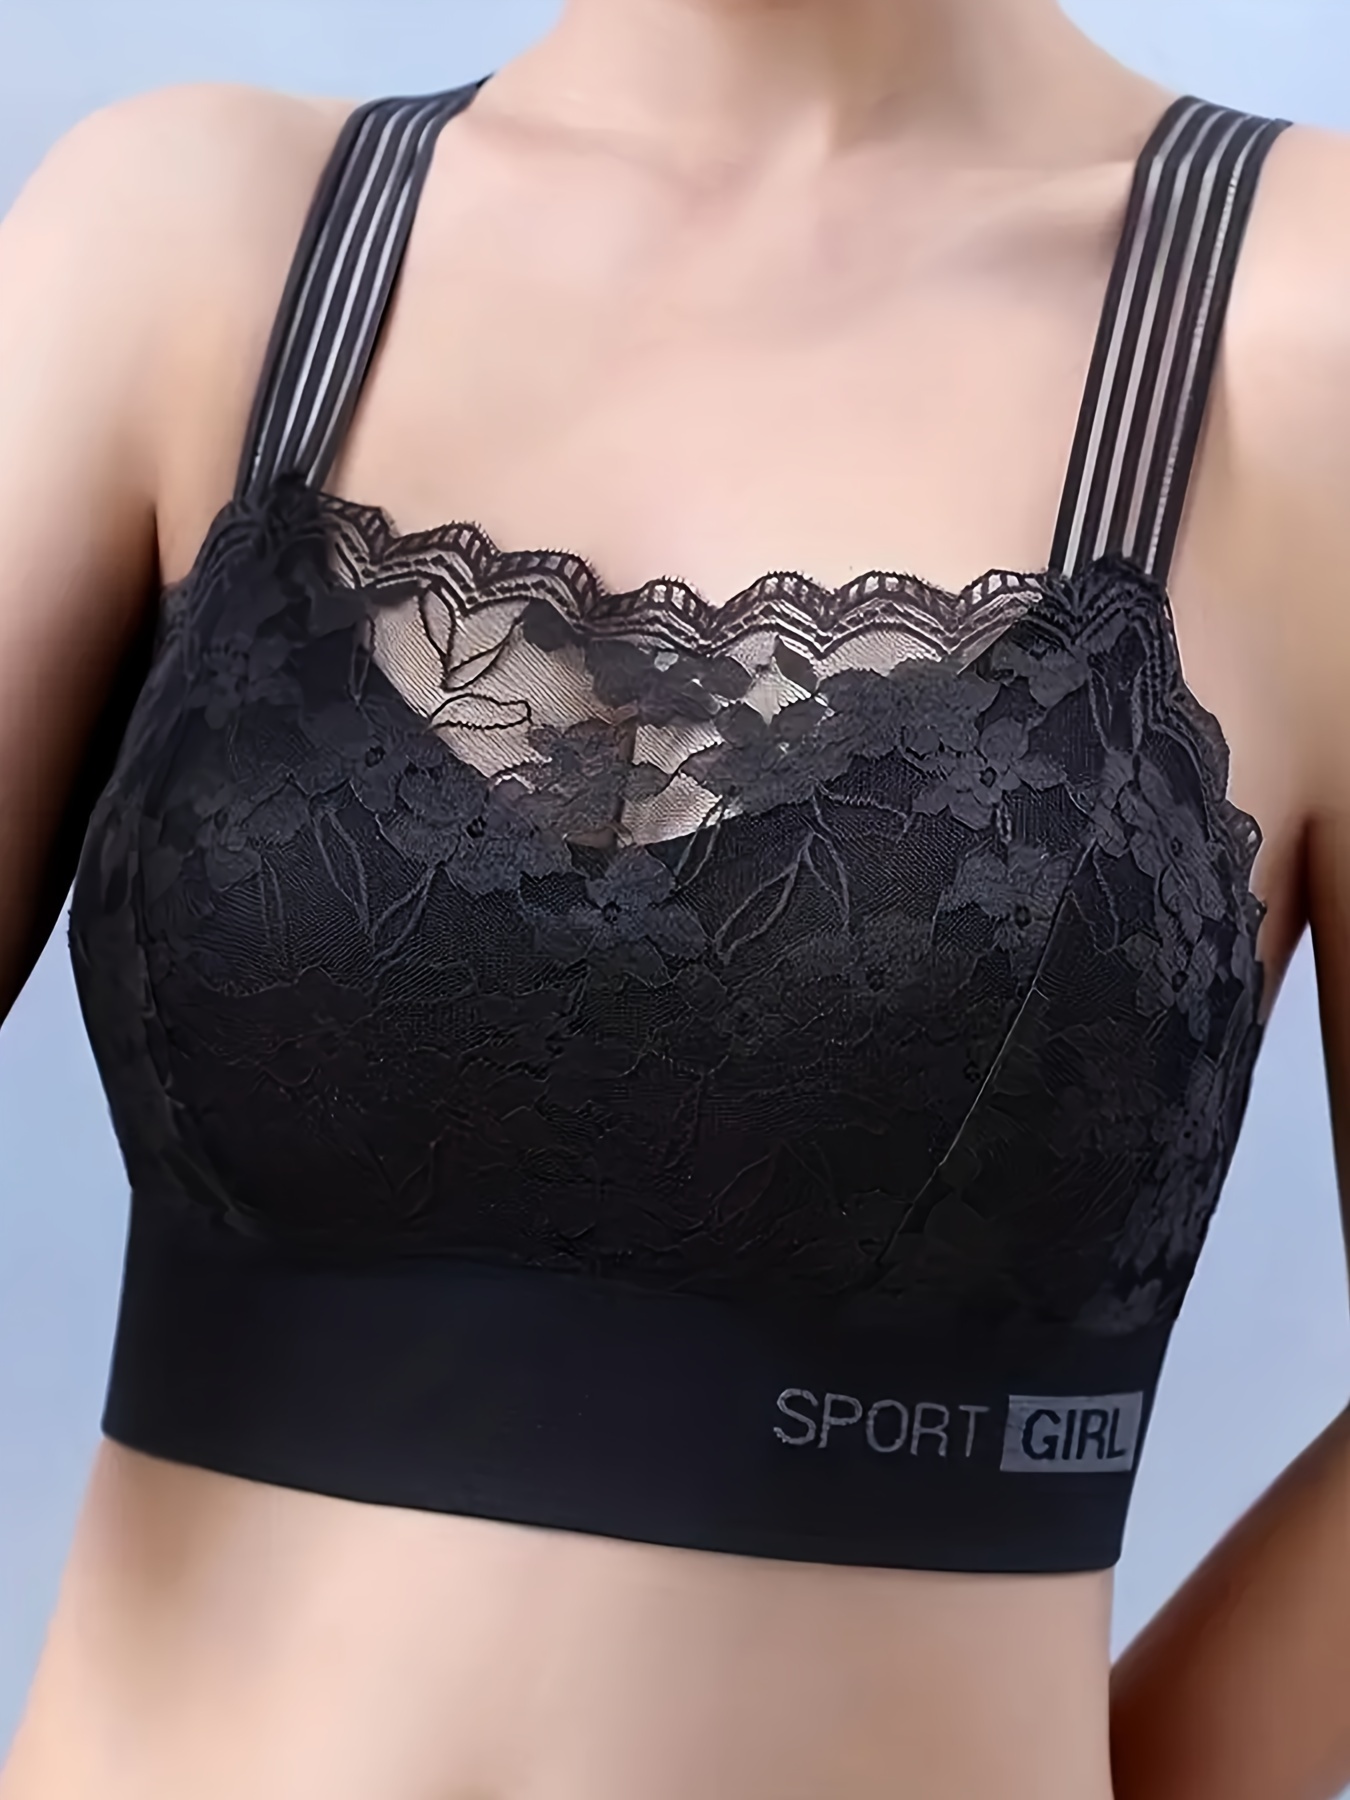 Bras N Things - Be bold in the Electrify sports bra